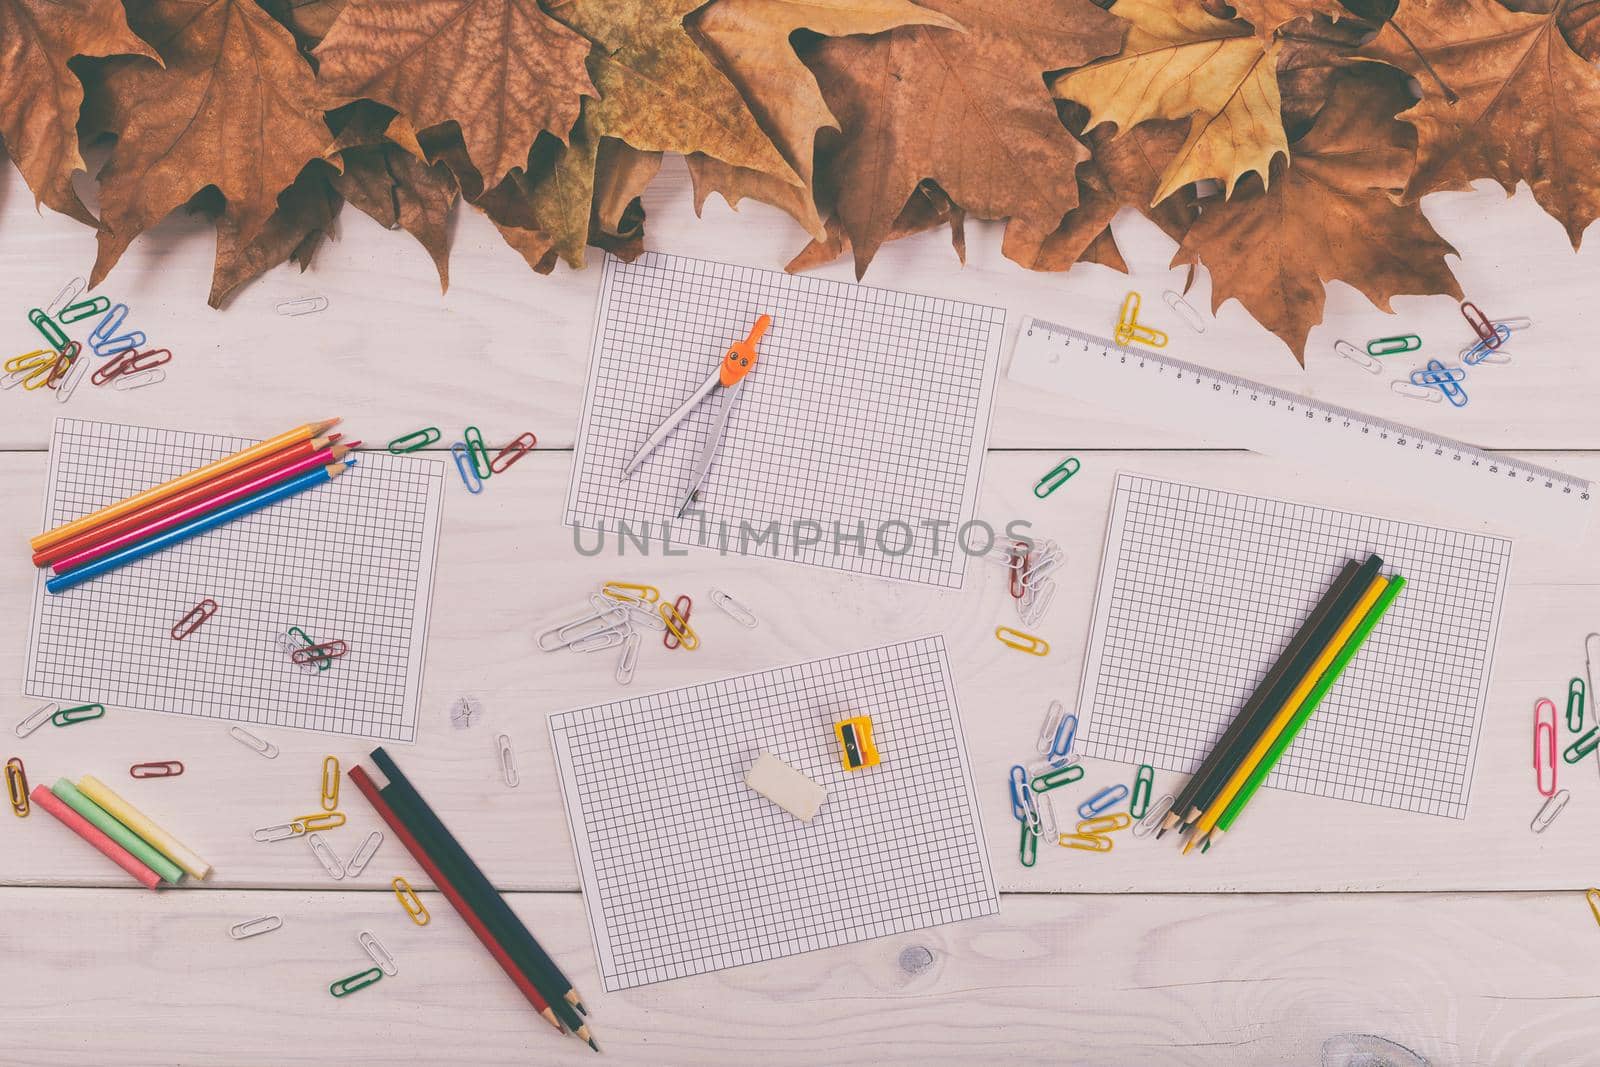 Empty papers and school supplies on wooden table with autumn leaves.Image is intentionally toned.